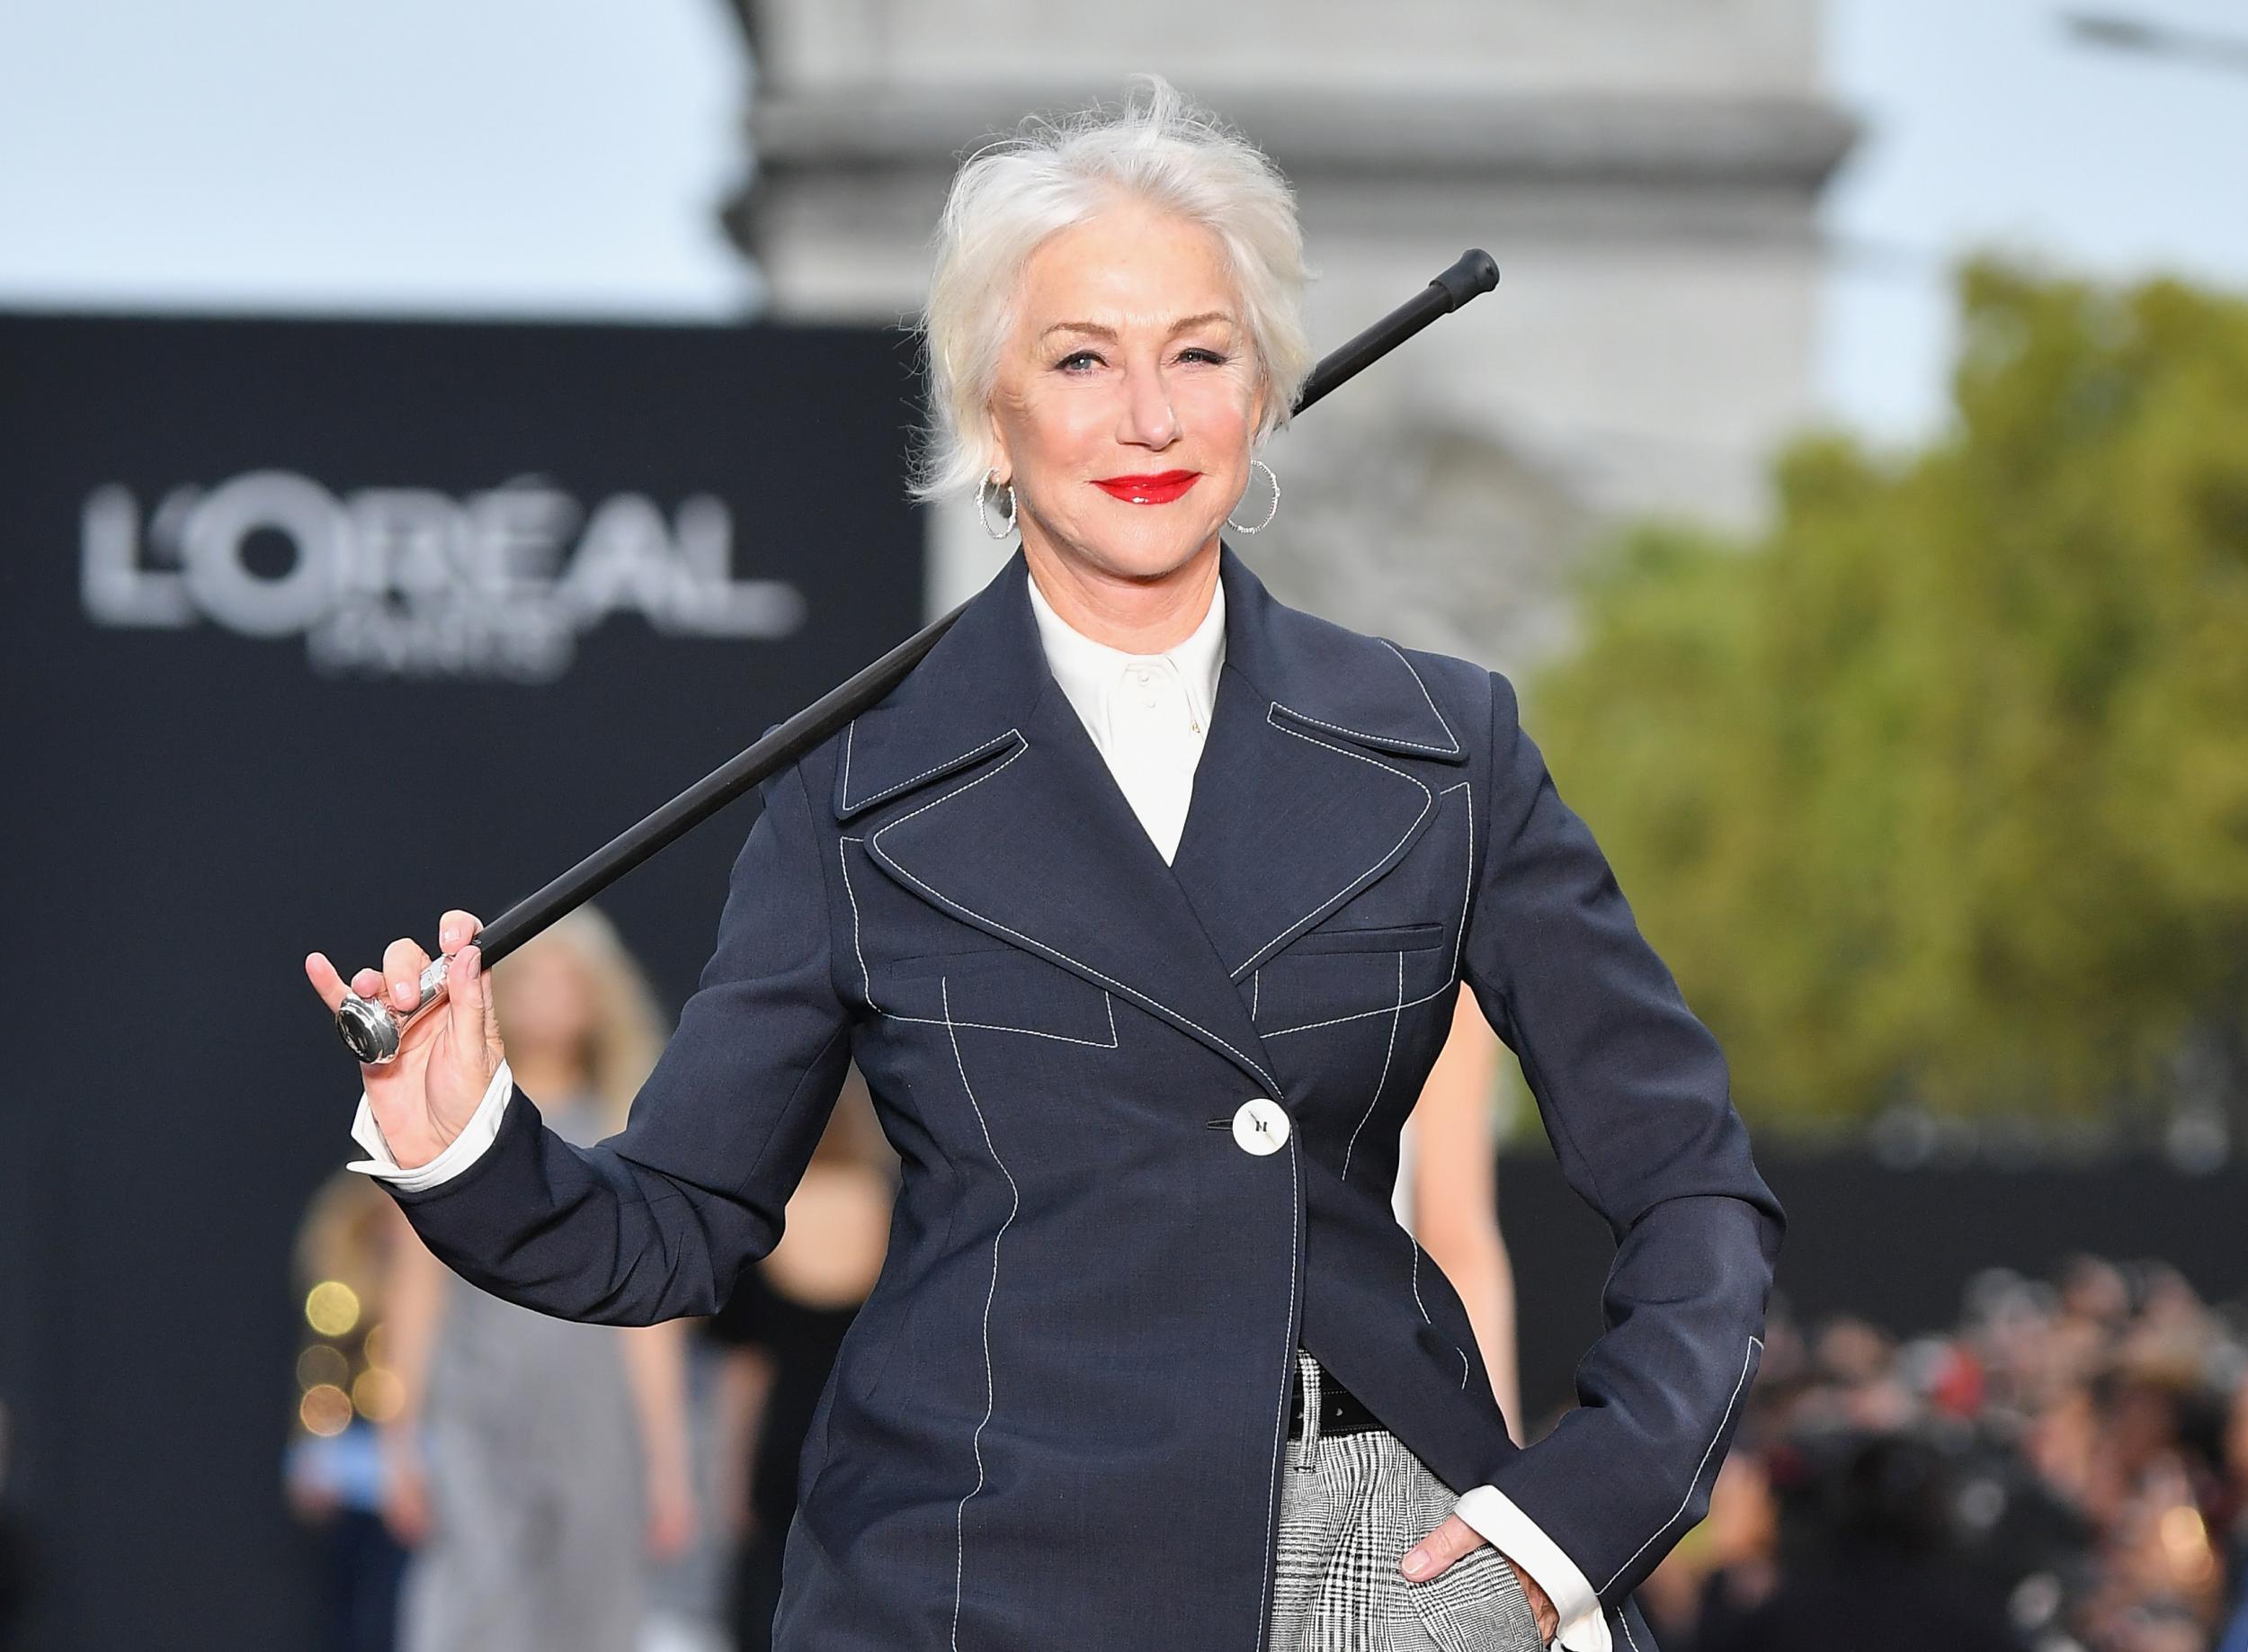 Helen Mirren walks the runway during the Le Defile L'Oreal Paris show as part of the Paris Fashion Week Womenswear Spring/Summer 2018 on October 1, 2017 in Paris, France.